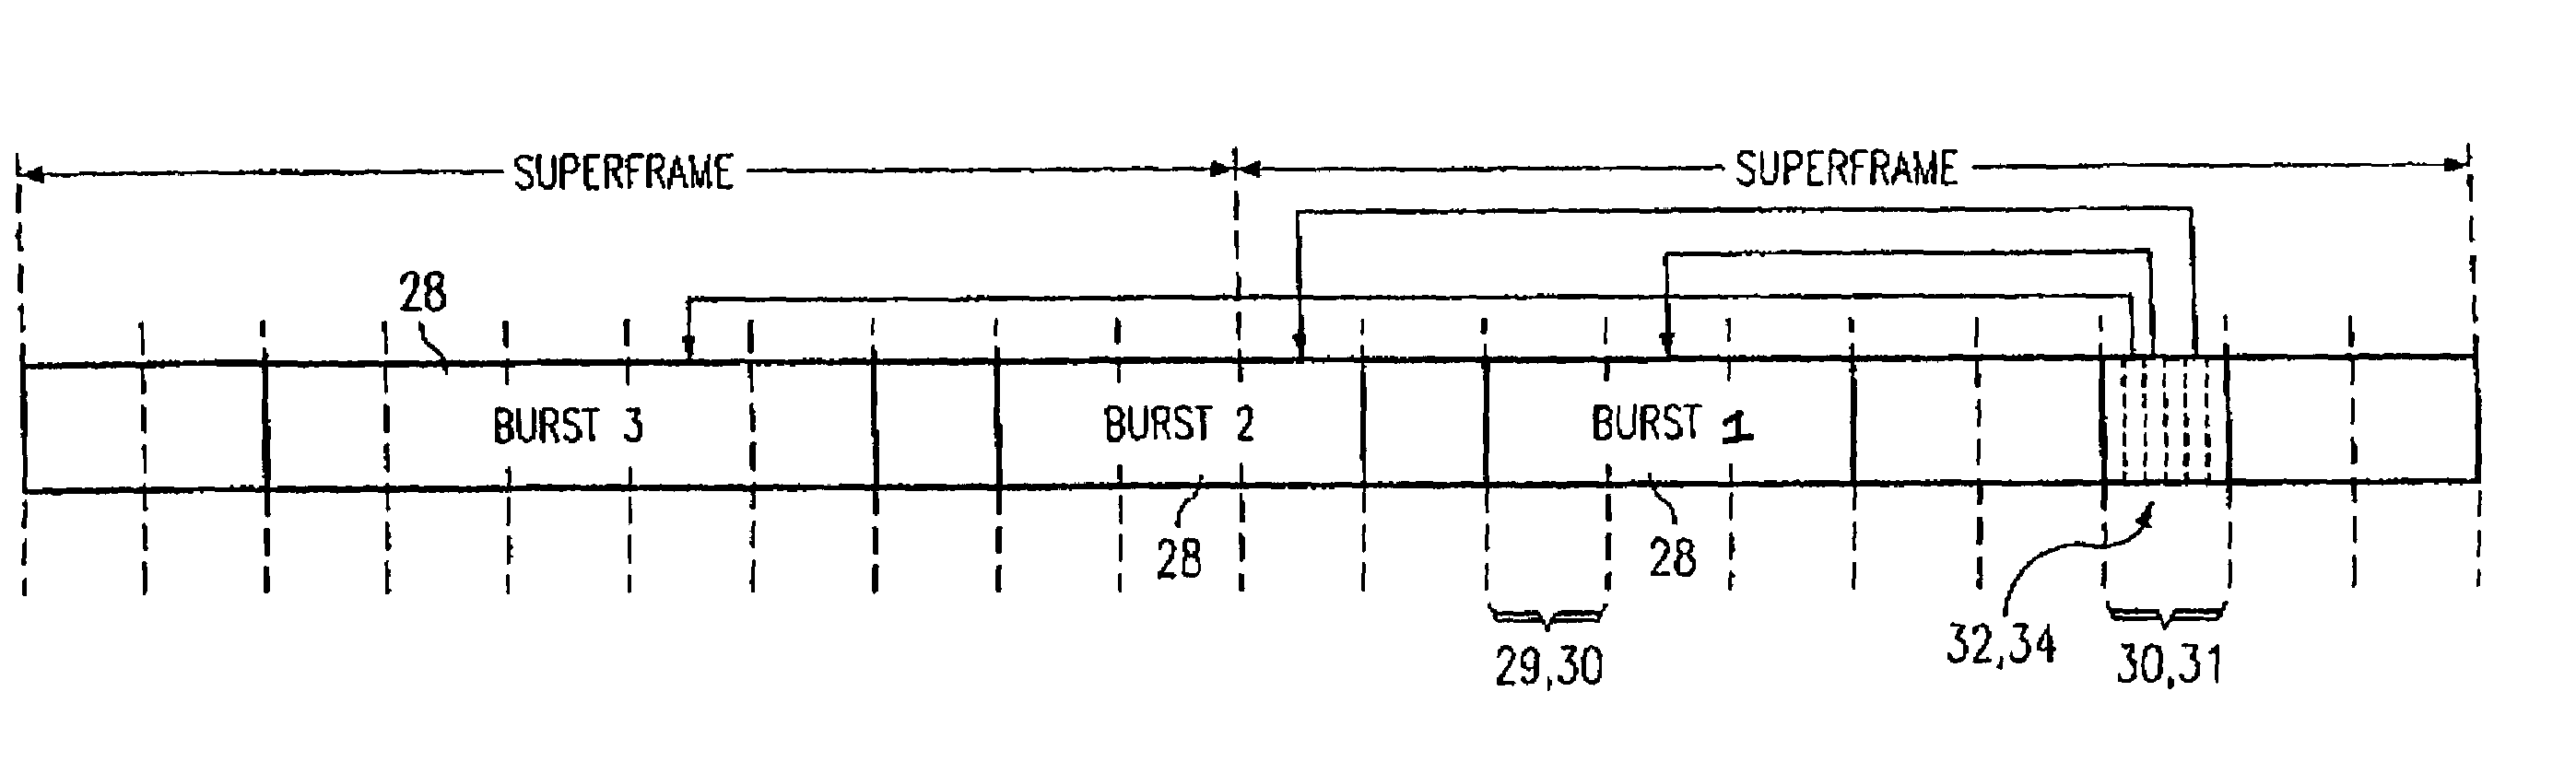 Method and apparatus for synchronized slotted optical burst switching